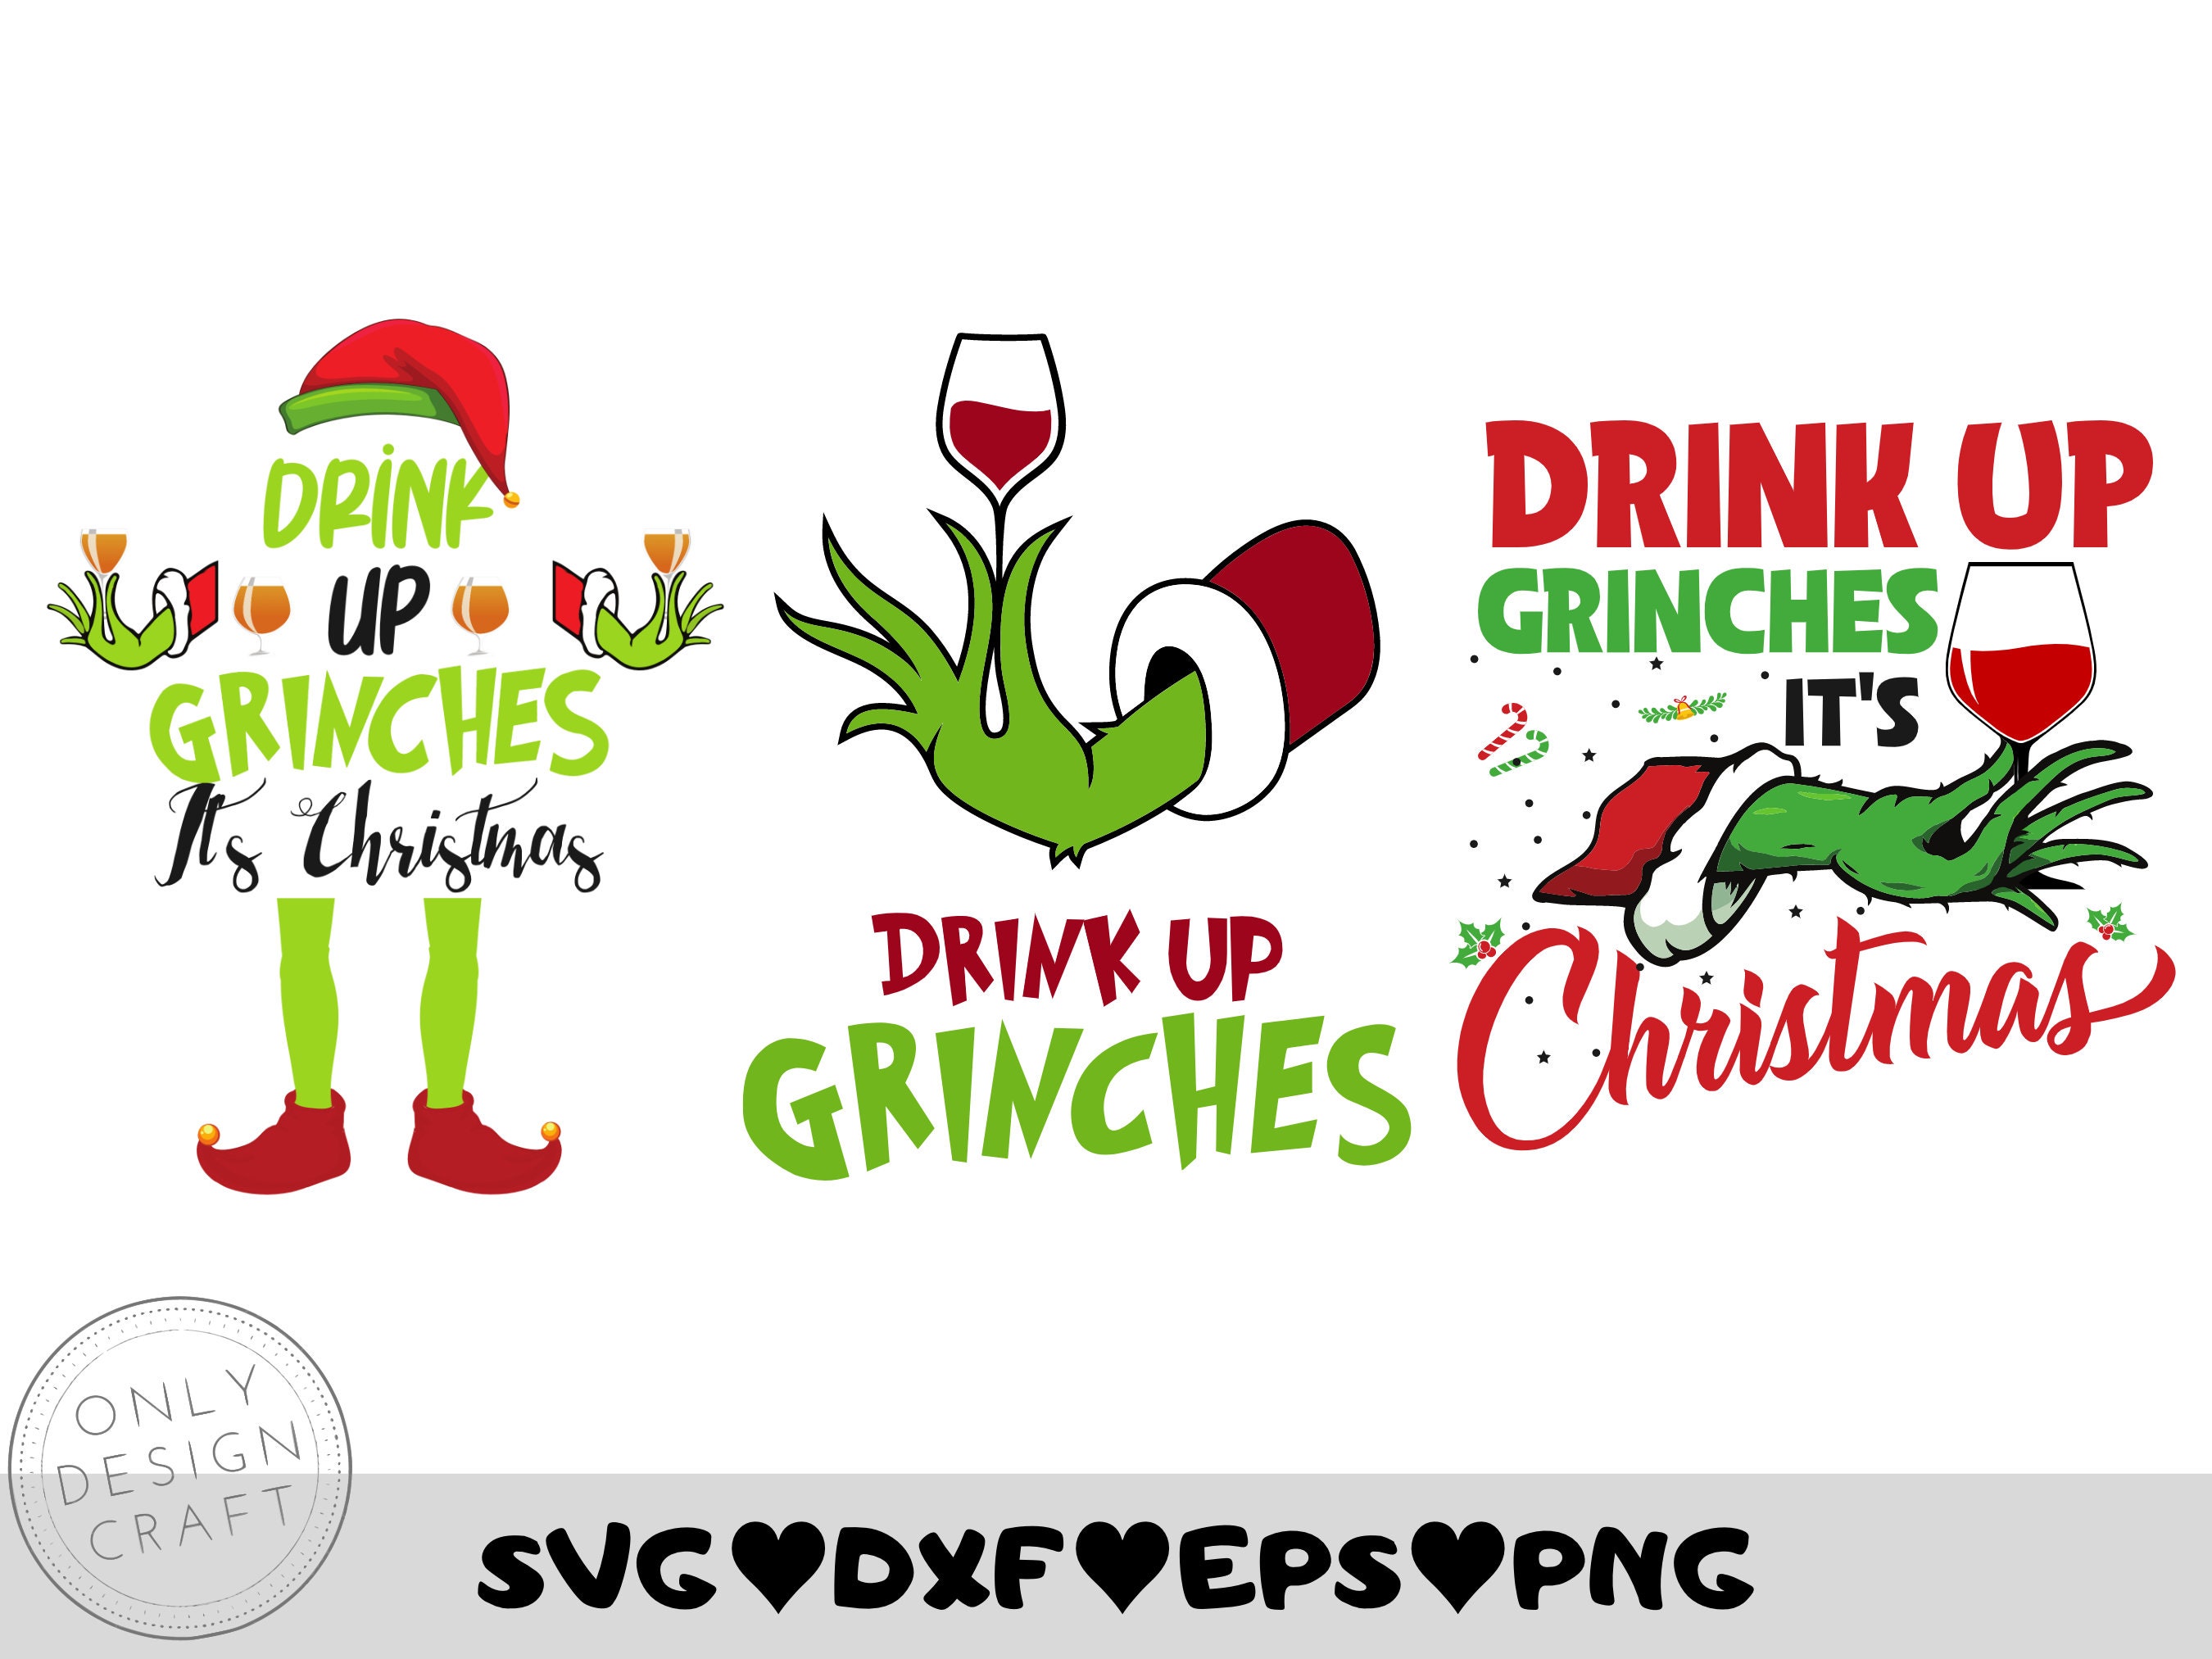 Drink Up Grinches Christmas Cups-10ea/16oz Styrofoam Christmas Party C –  Preppy Mama